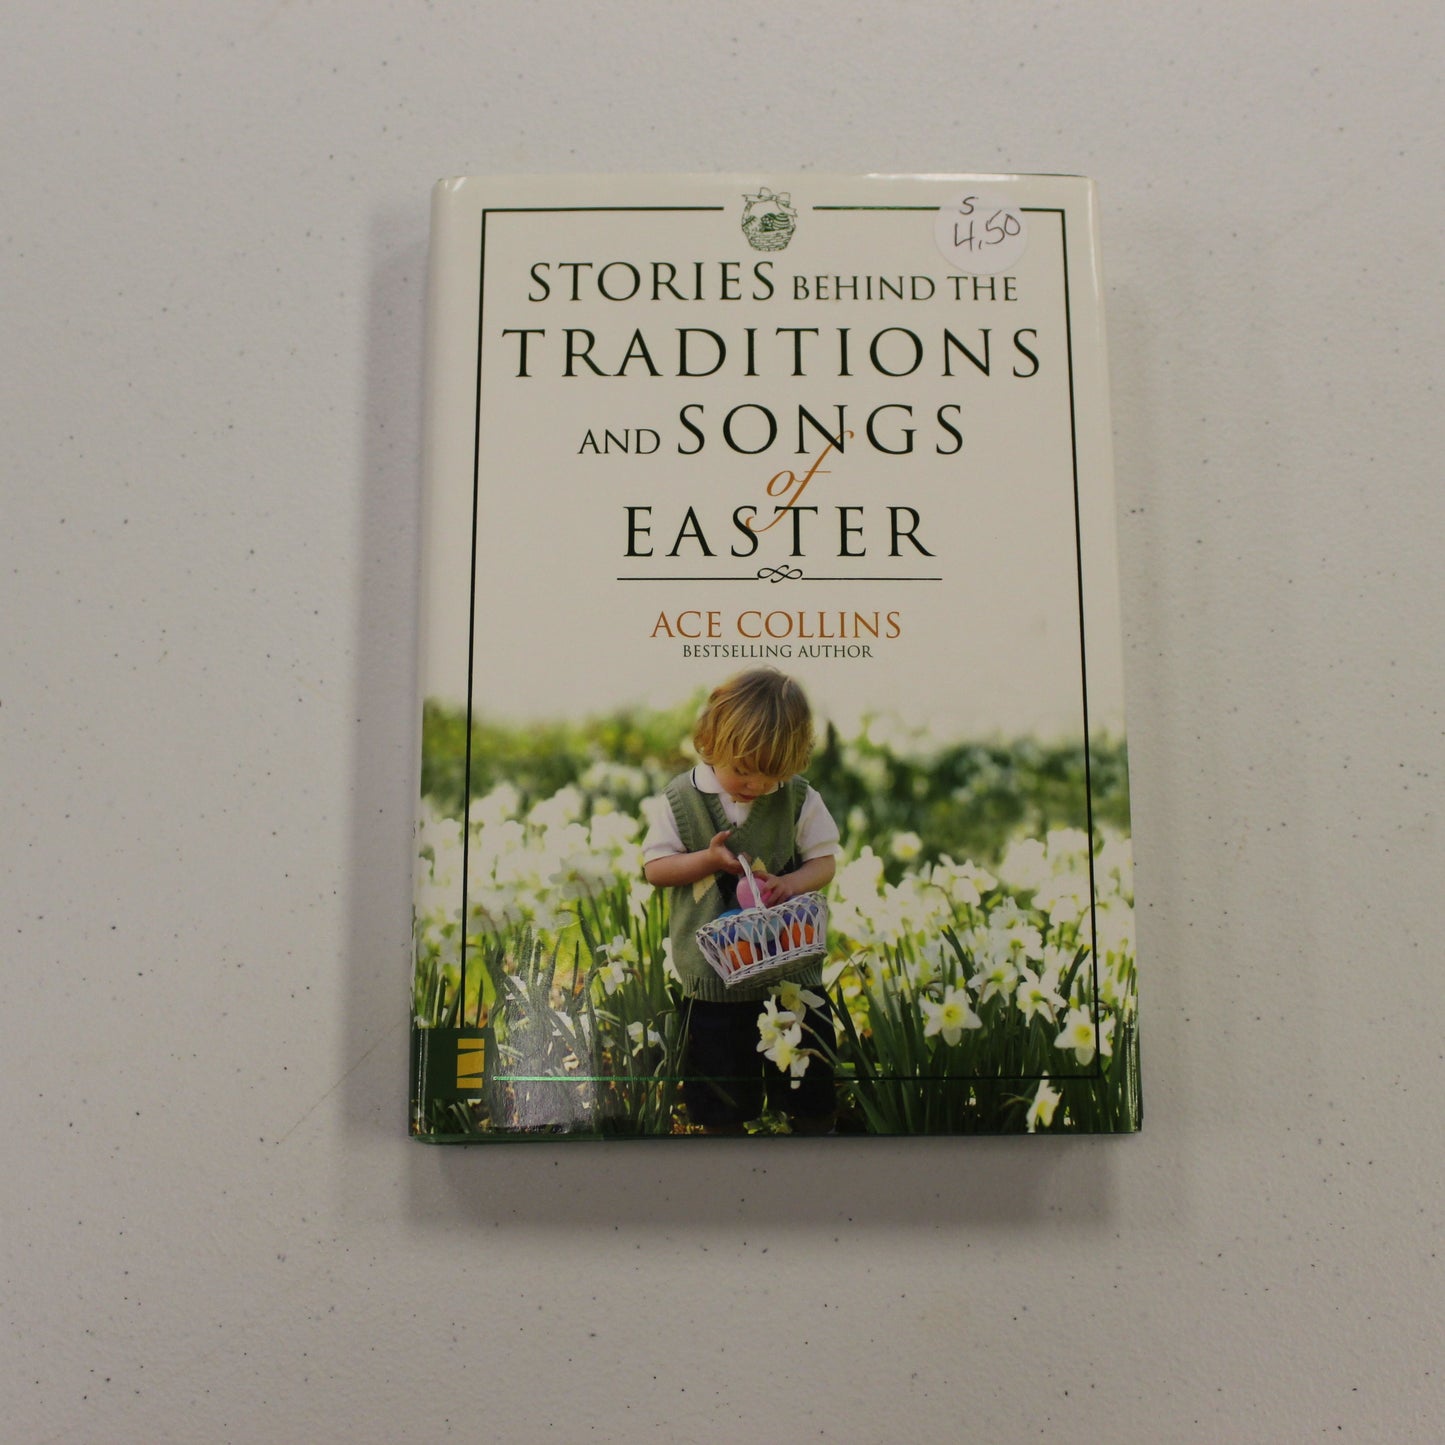 STORIES BEHIND THE TRADITIONS AND SONGS OF EASTER